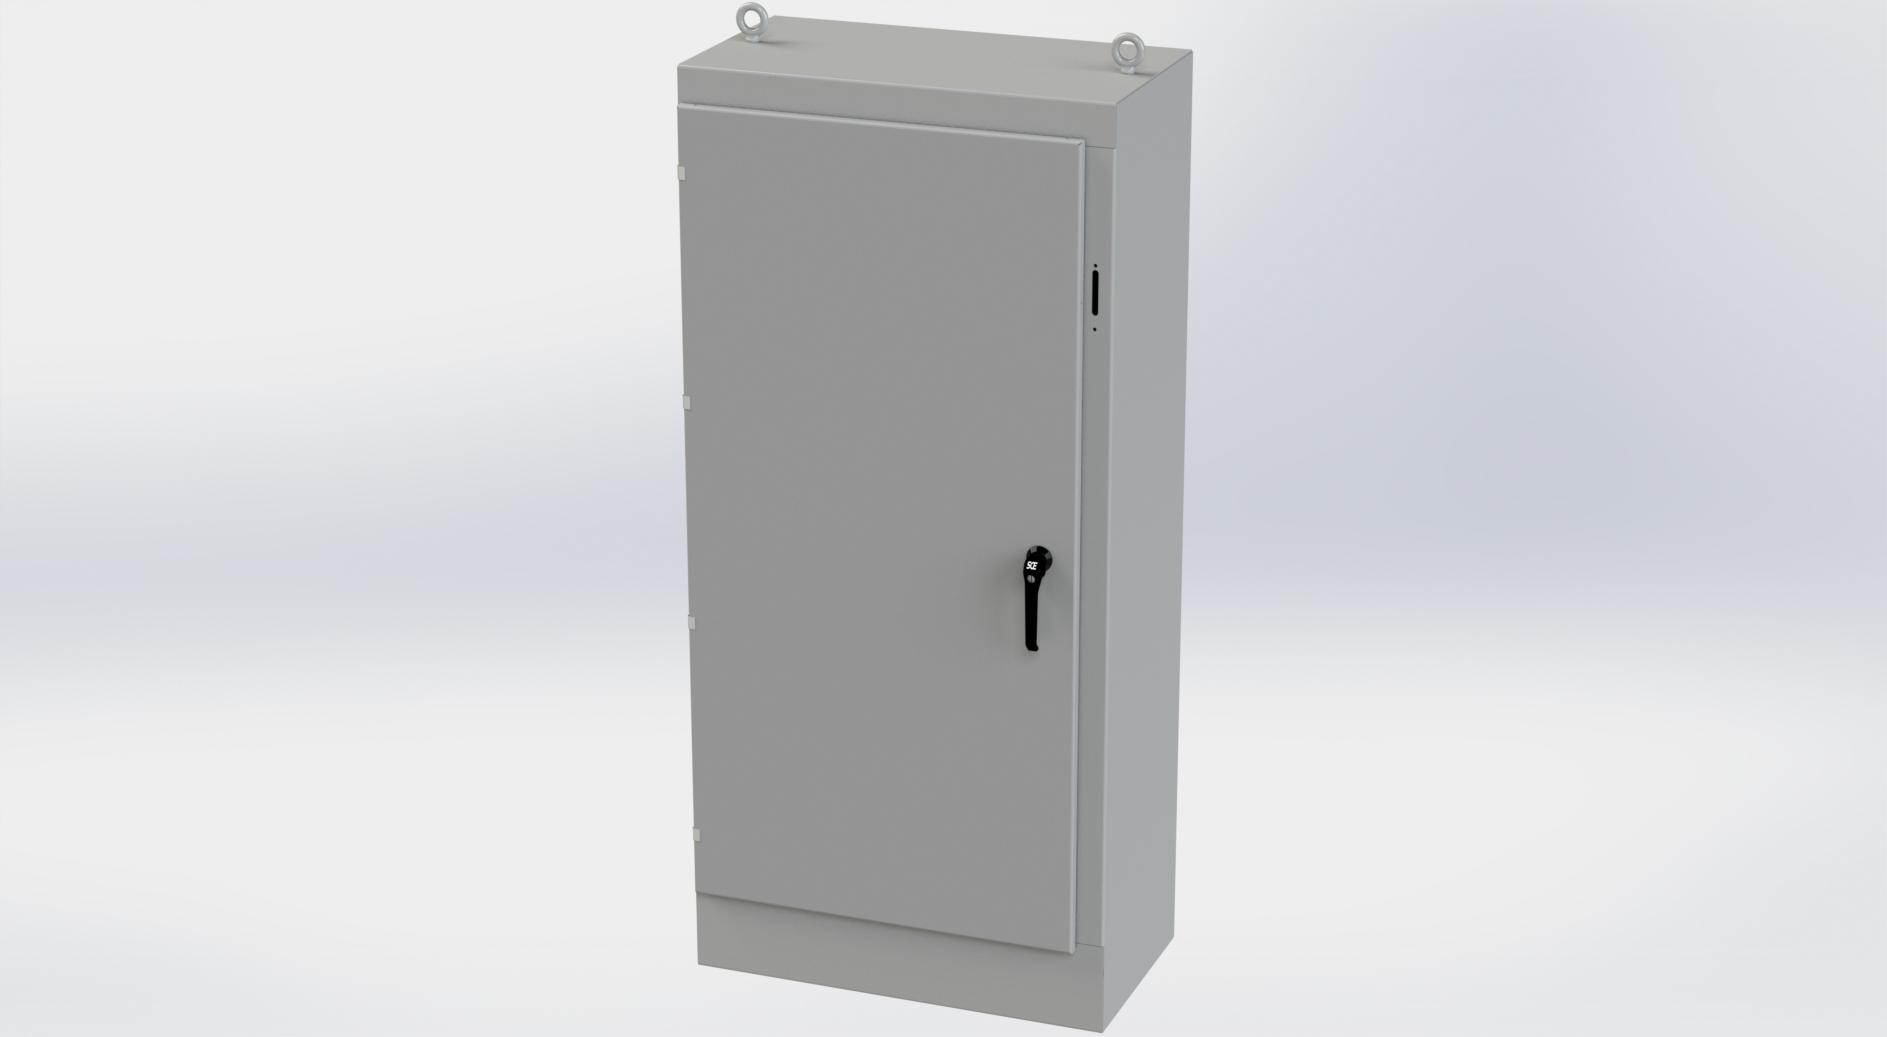 Saginaw Control SCE-72XM3418 1DR XM Enclosure, Height:72.00", Width:33.50", Depth:18.00", ANSI-61 gray powder coating inside and out. Sub-panels are powder coated white.  